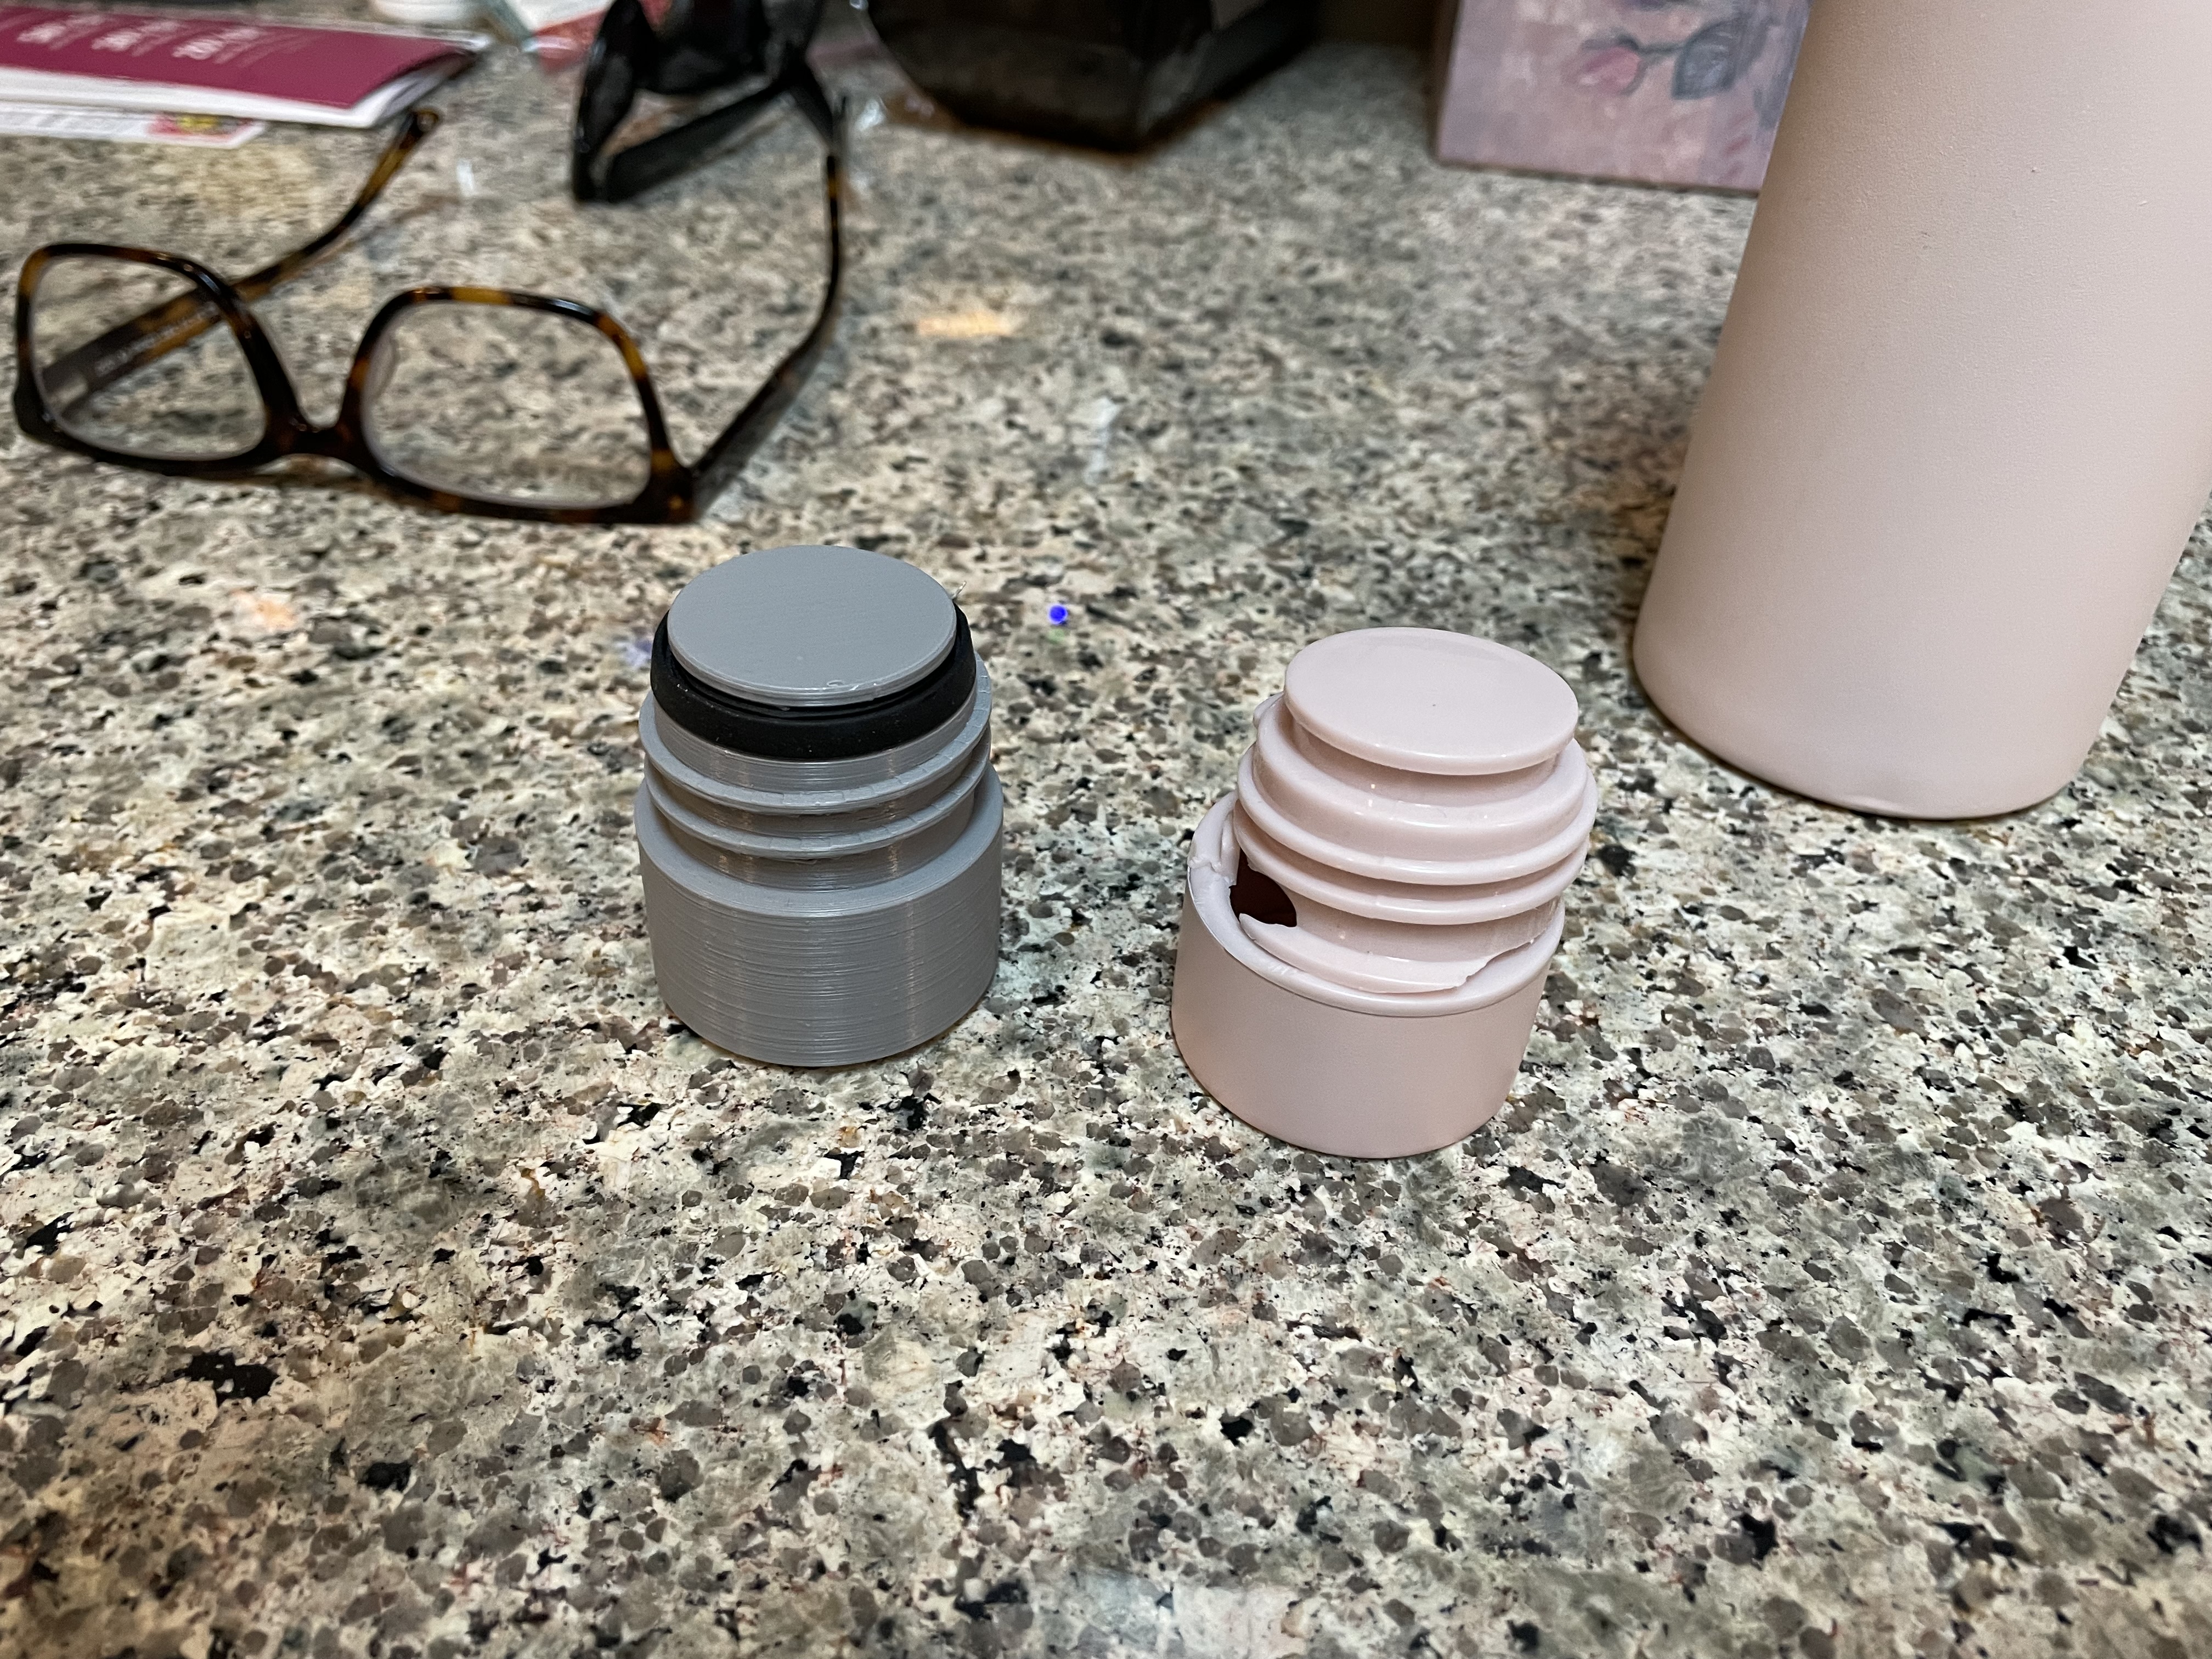 Replacement Lid for "MANNA" water bottle